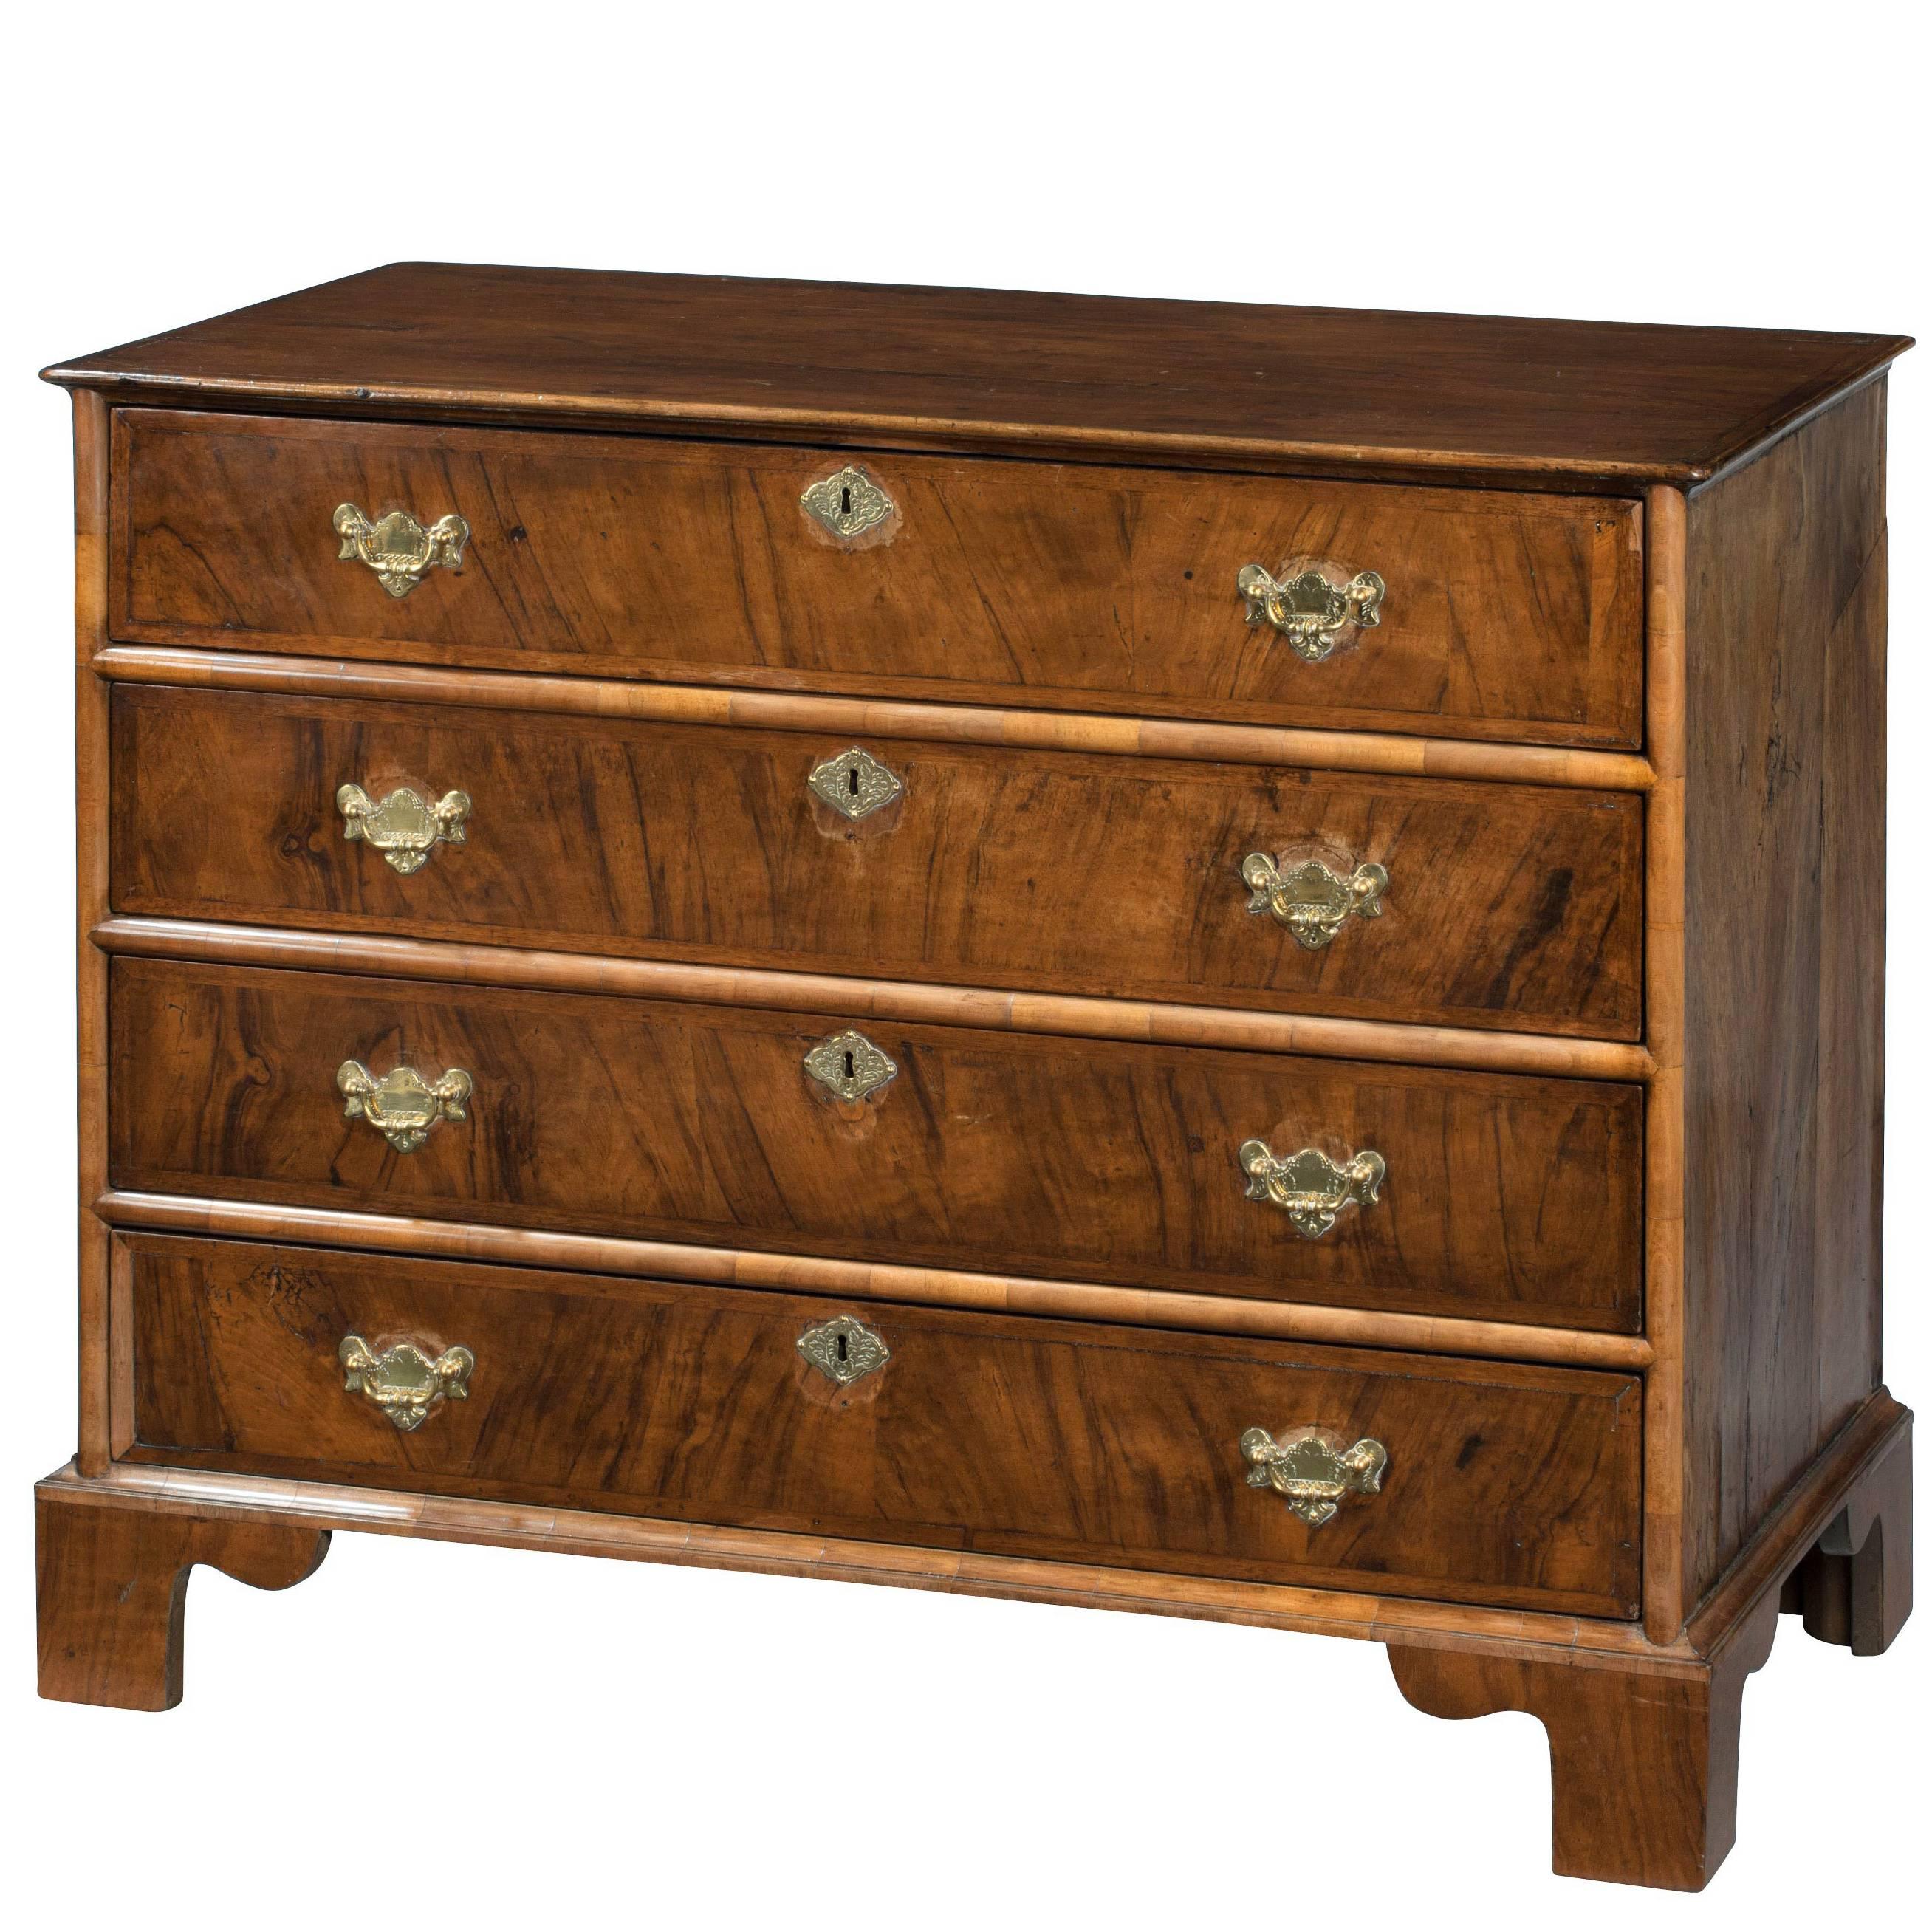 Mid-18th Century Chest of Four Long Drawers